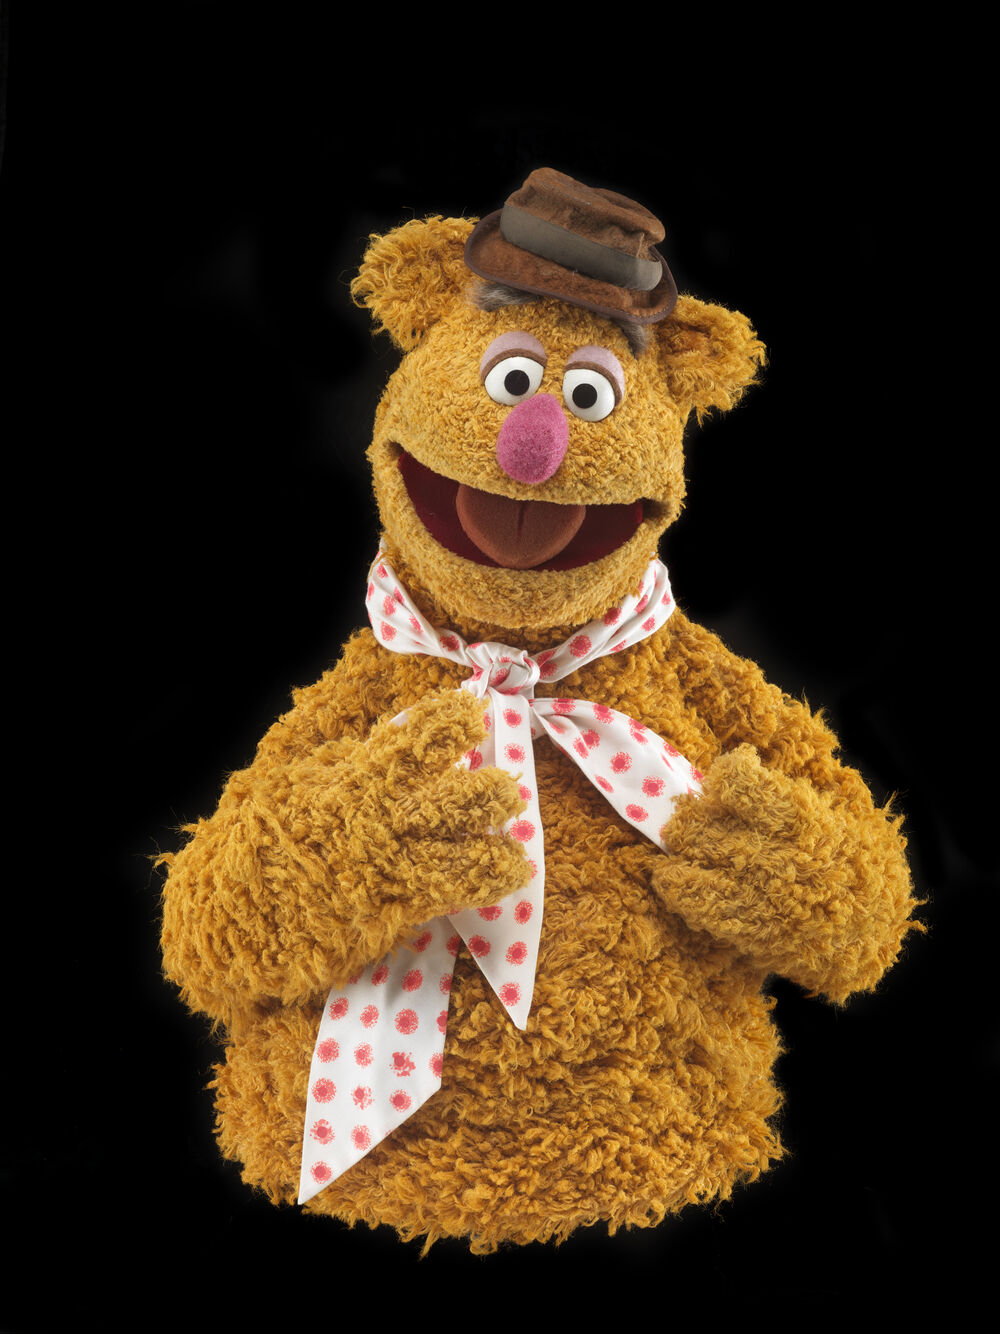 The Fozzie Bear puppet, created by Jim Henson, wearing a hat and polka dot bow tie.